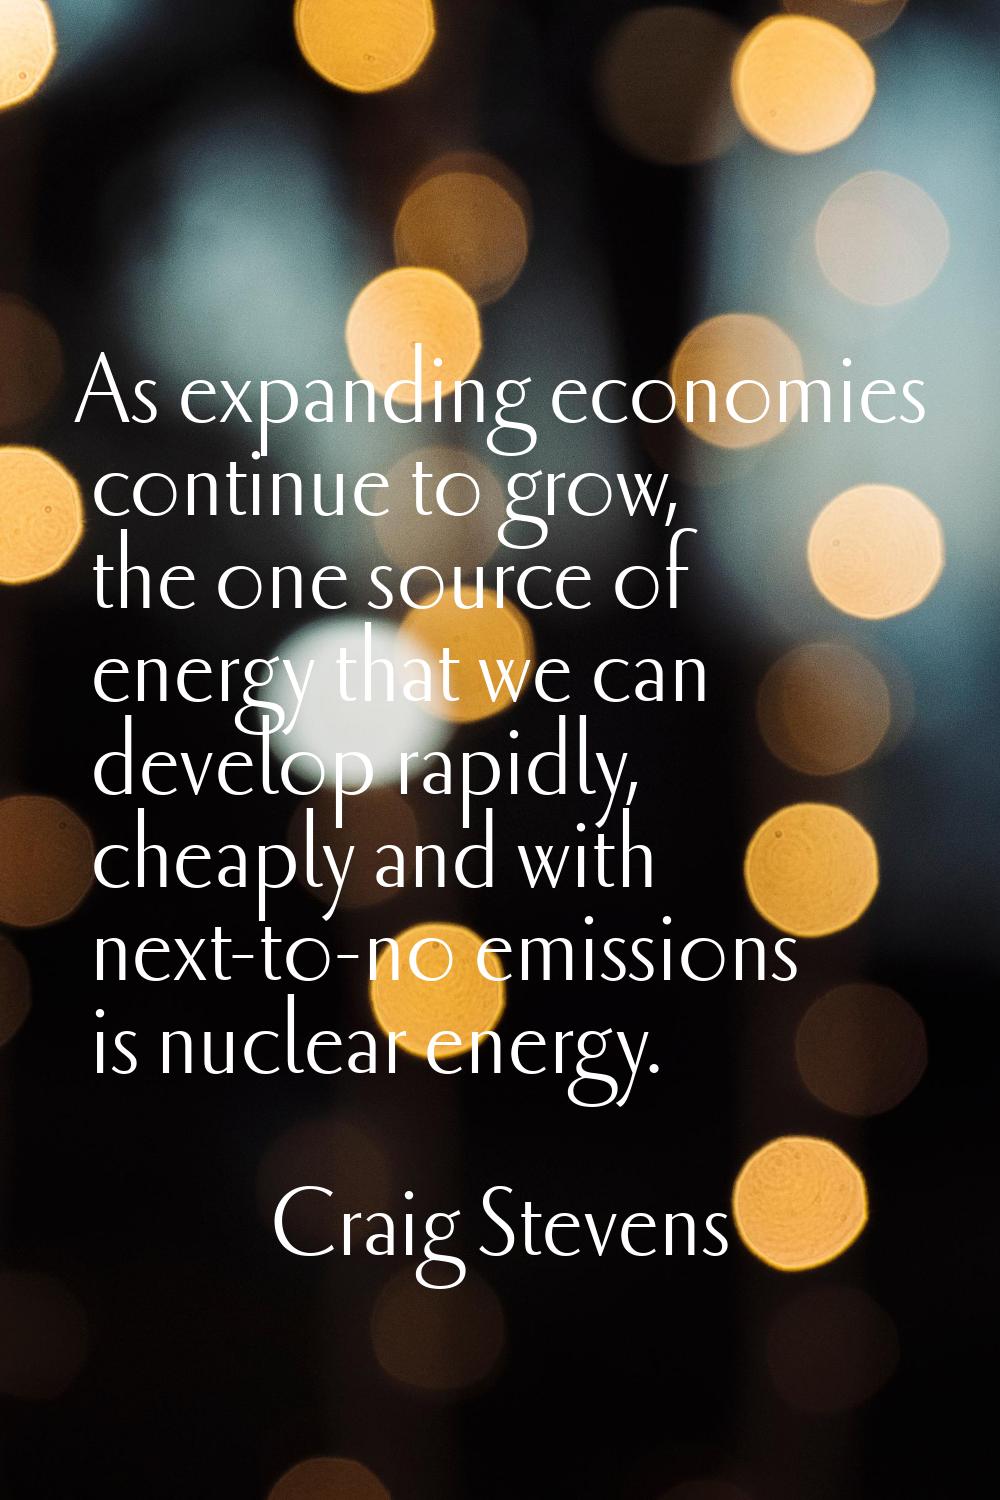 As expanding economies continue to grow, the one source of energy that we can develop rapidly, chea